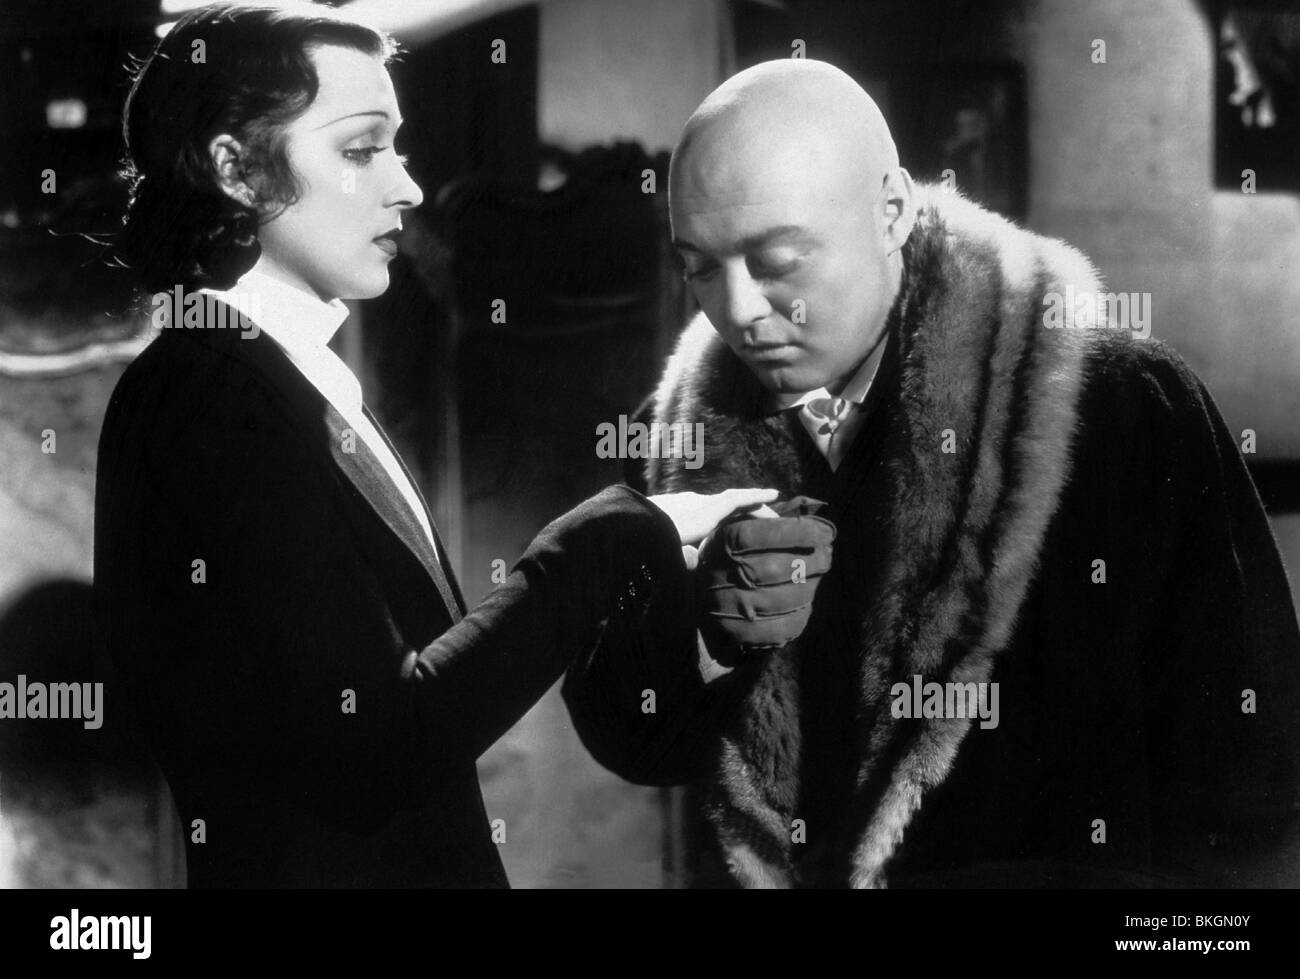 MAD LOVE (1935) FRANCES DRAKE, PETER LORRE MDLV 007 Stock Photo